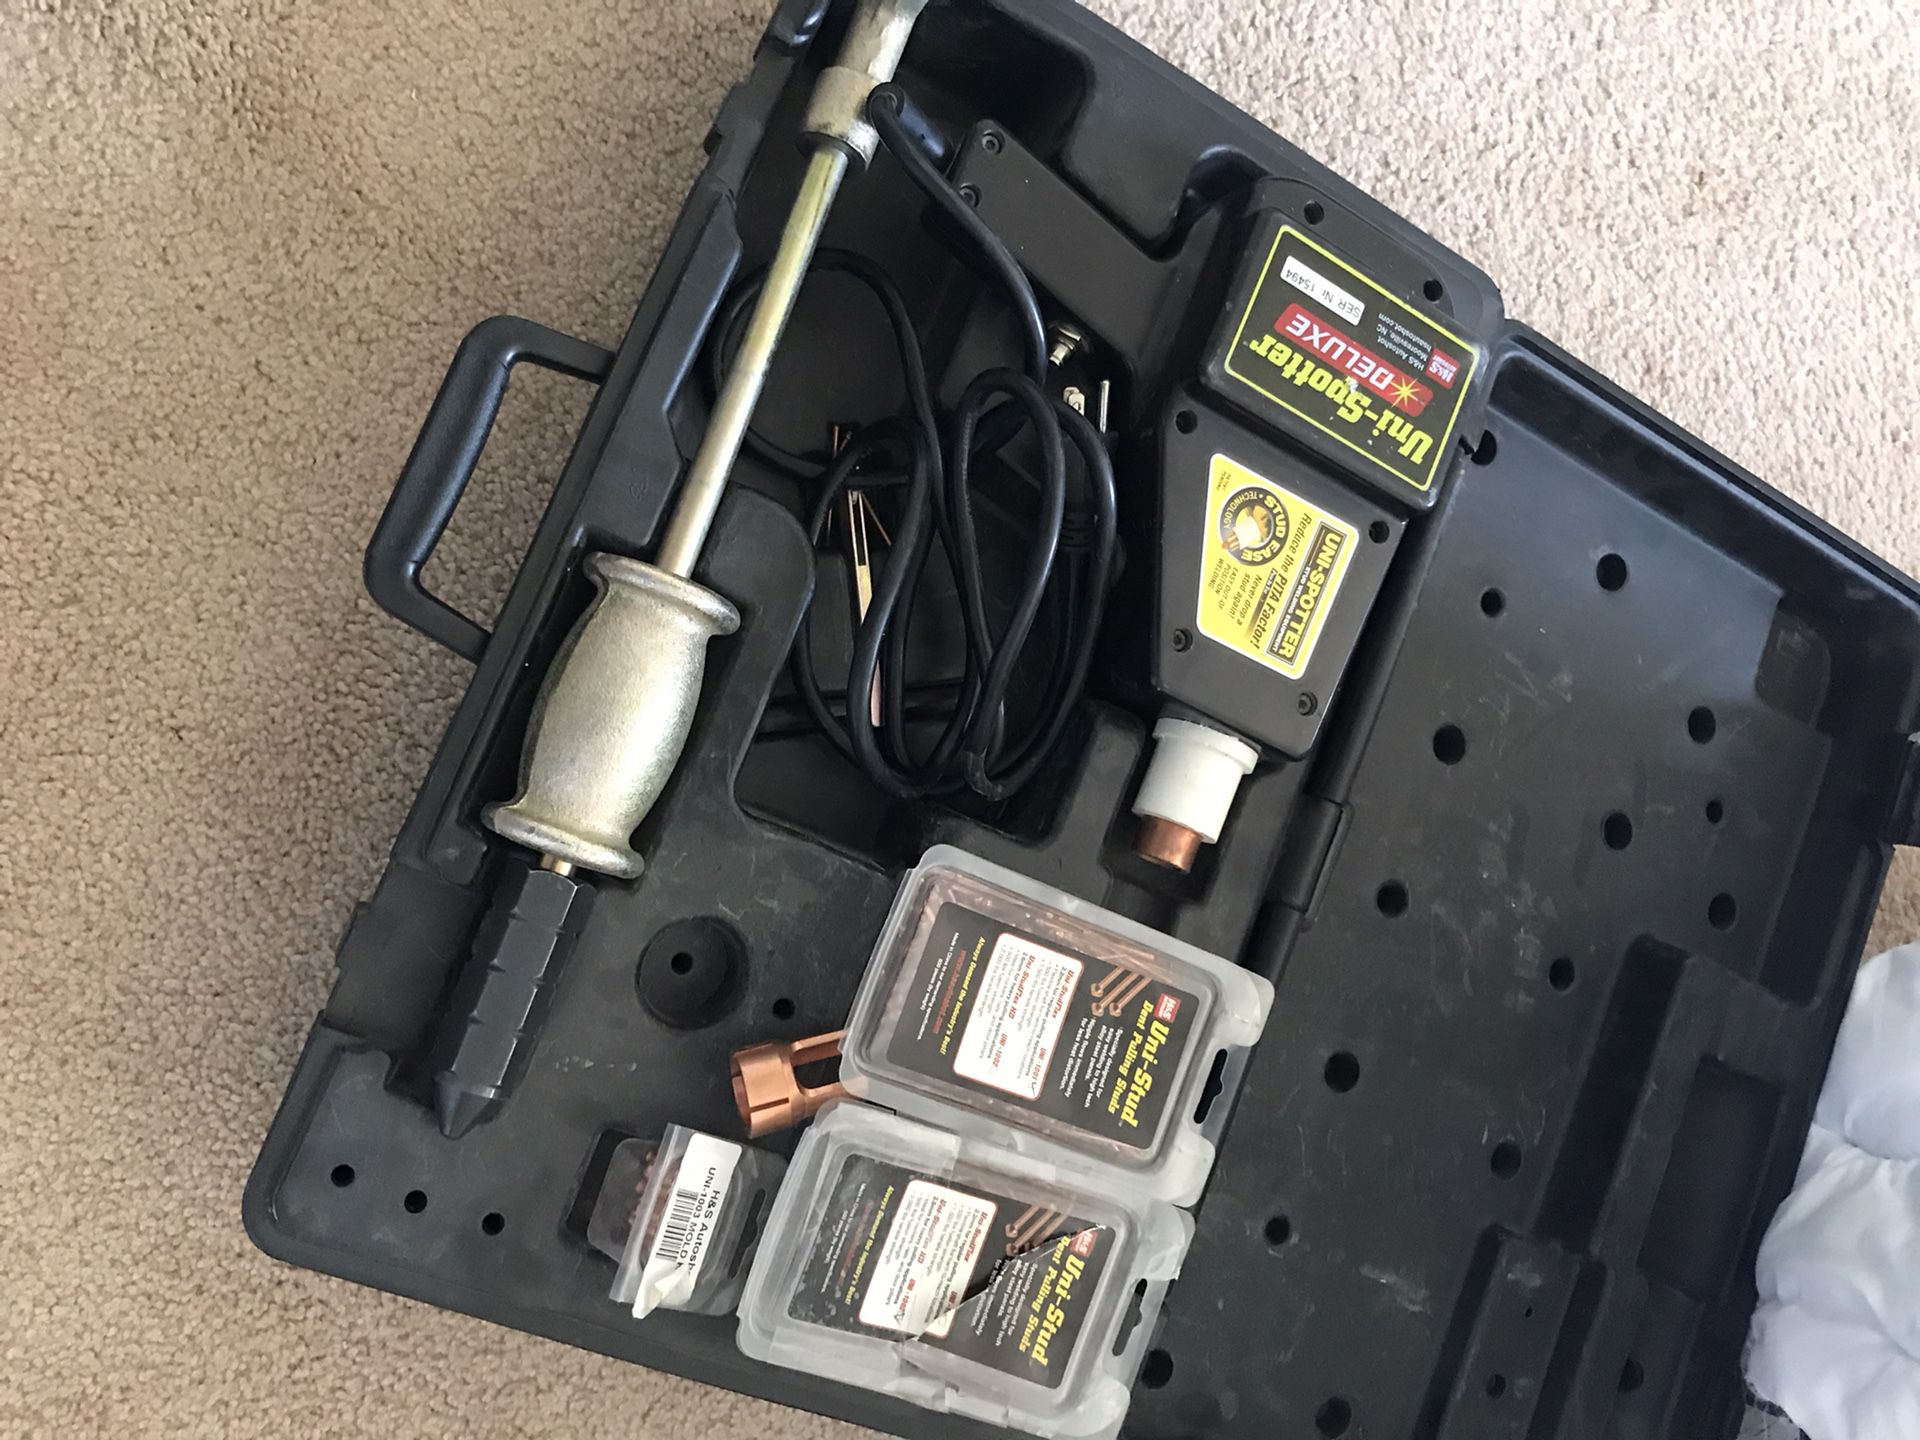 Stud welder set with an extra one for free